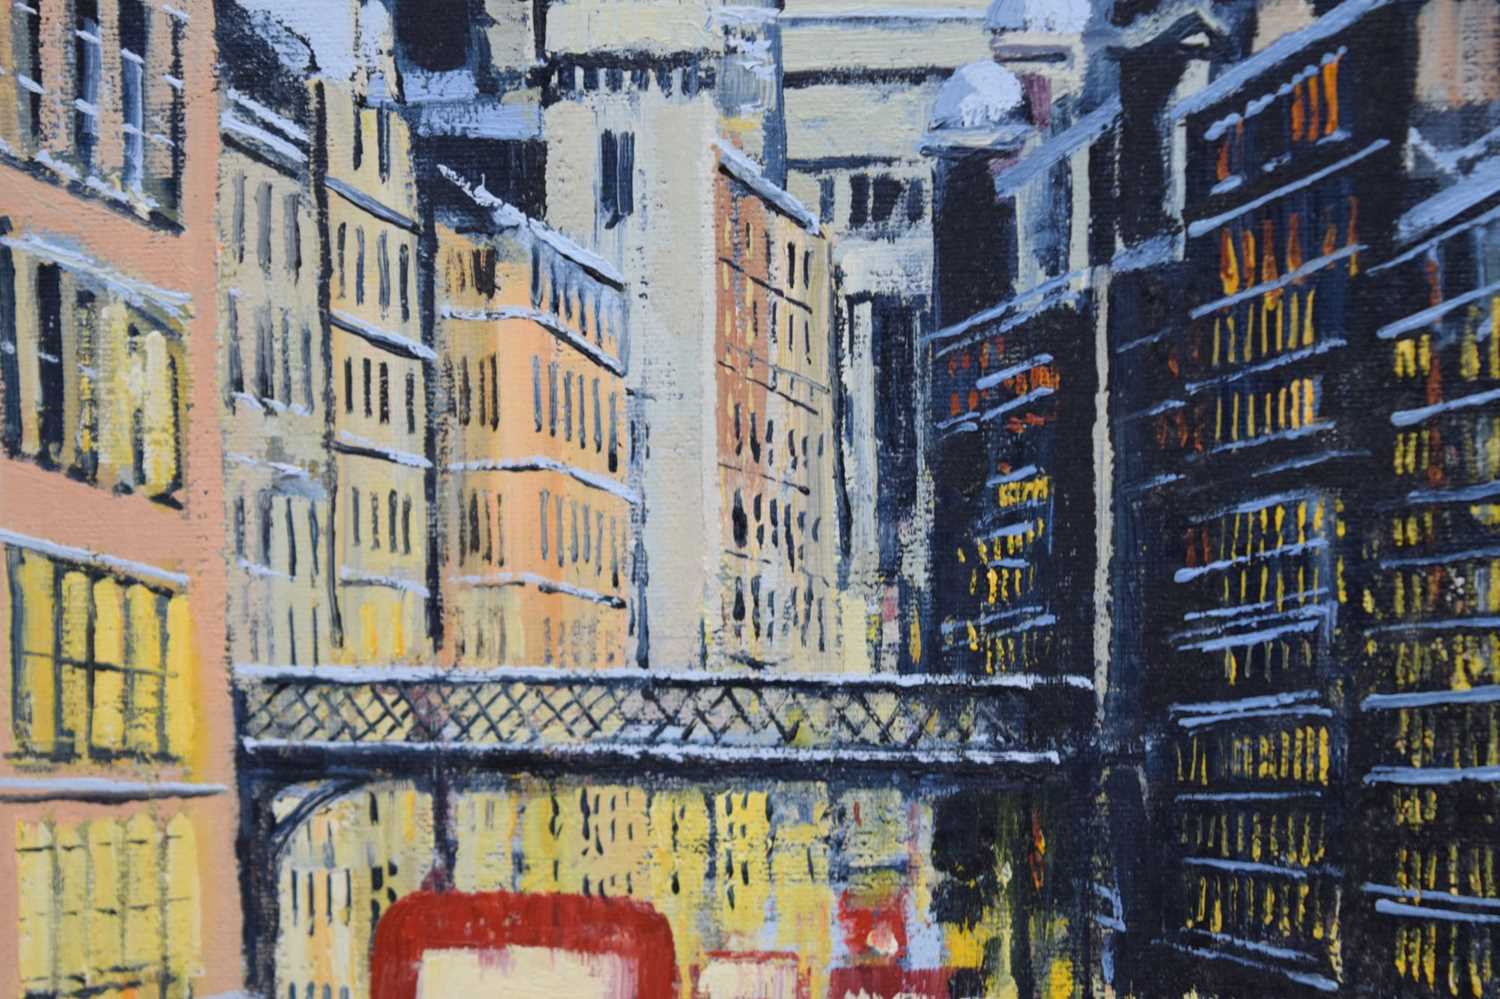 Alan King (1946-2013) - Oil on canvas - 'London Impressions', towards St. Pauls - Image 6 of 9